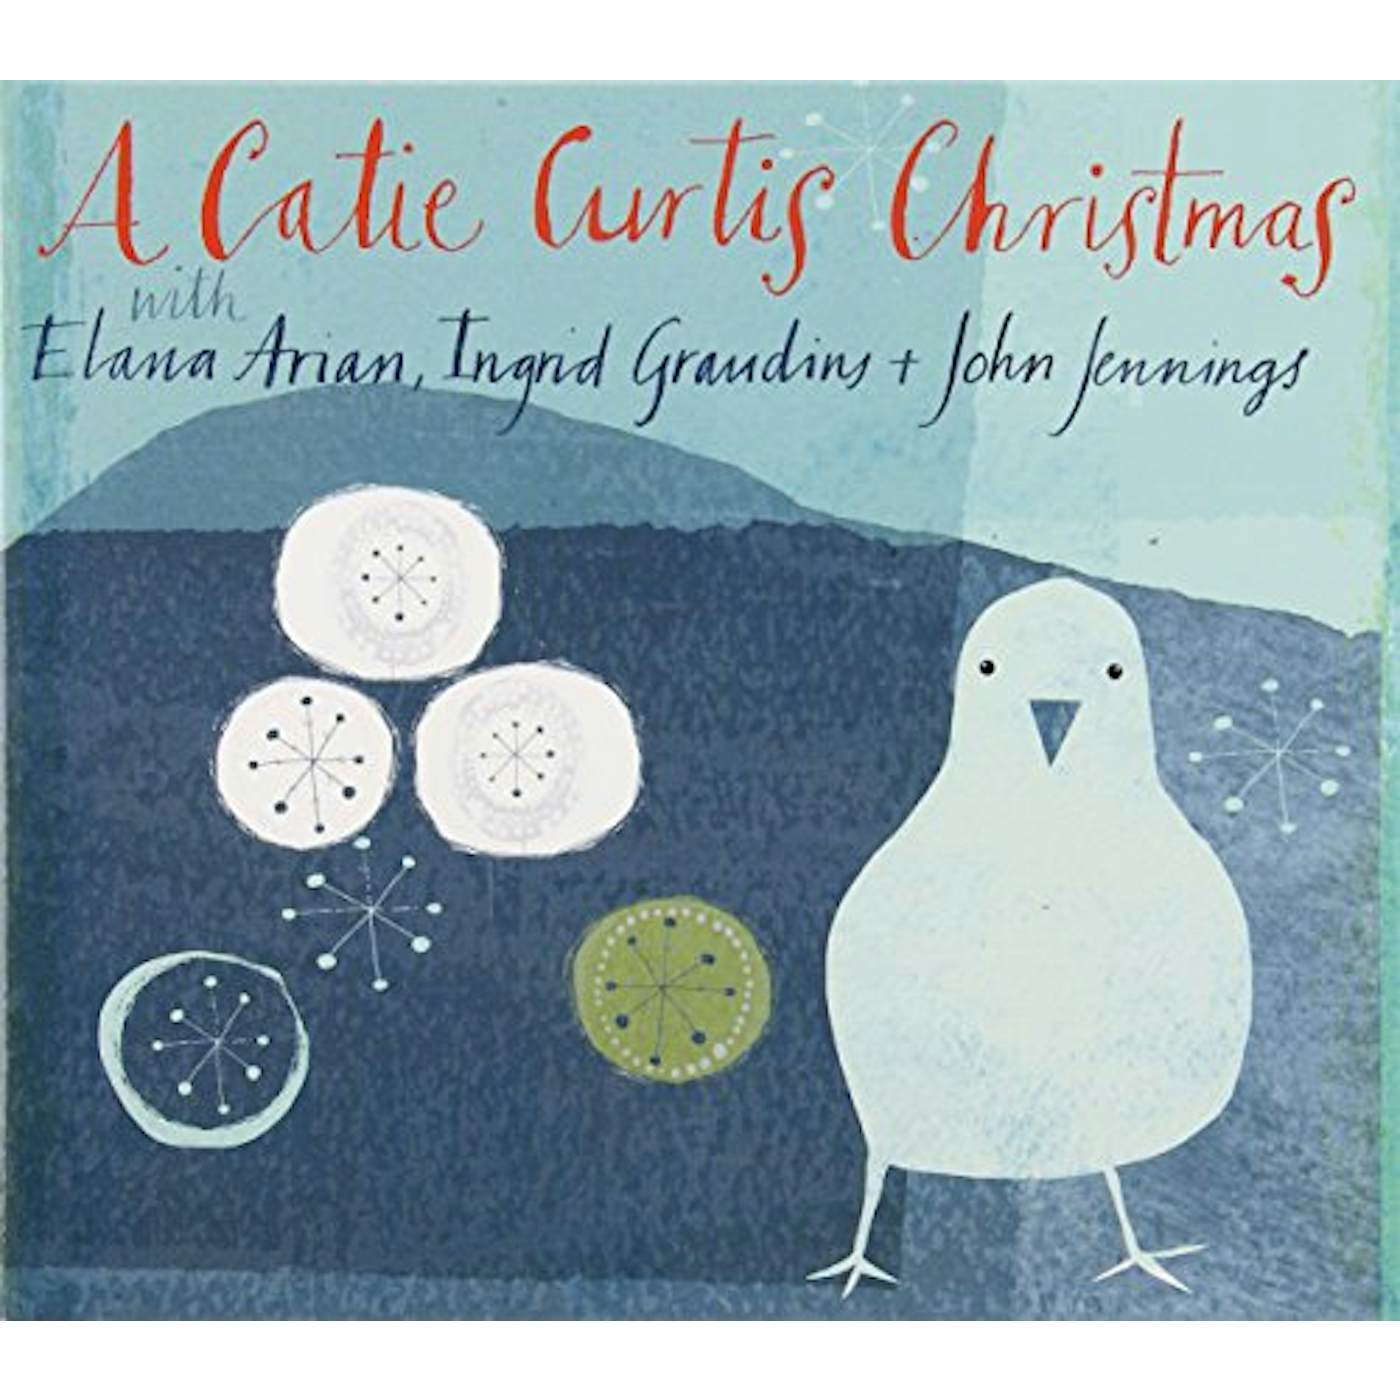 CATIE CURTIS CHRISTMAS CD